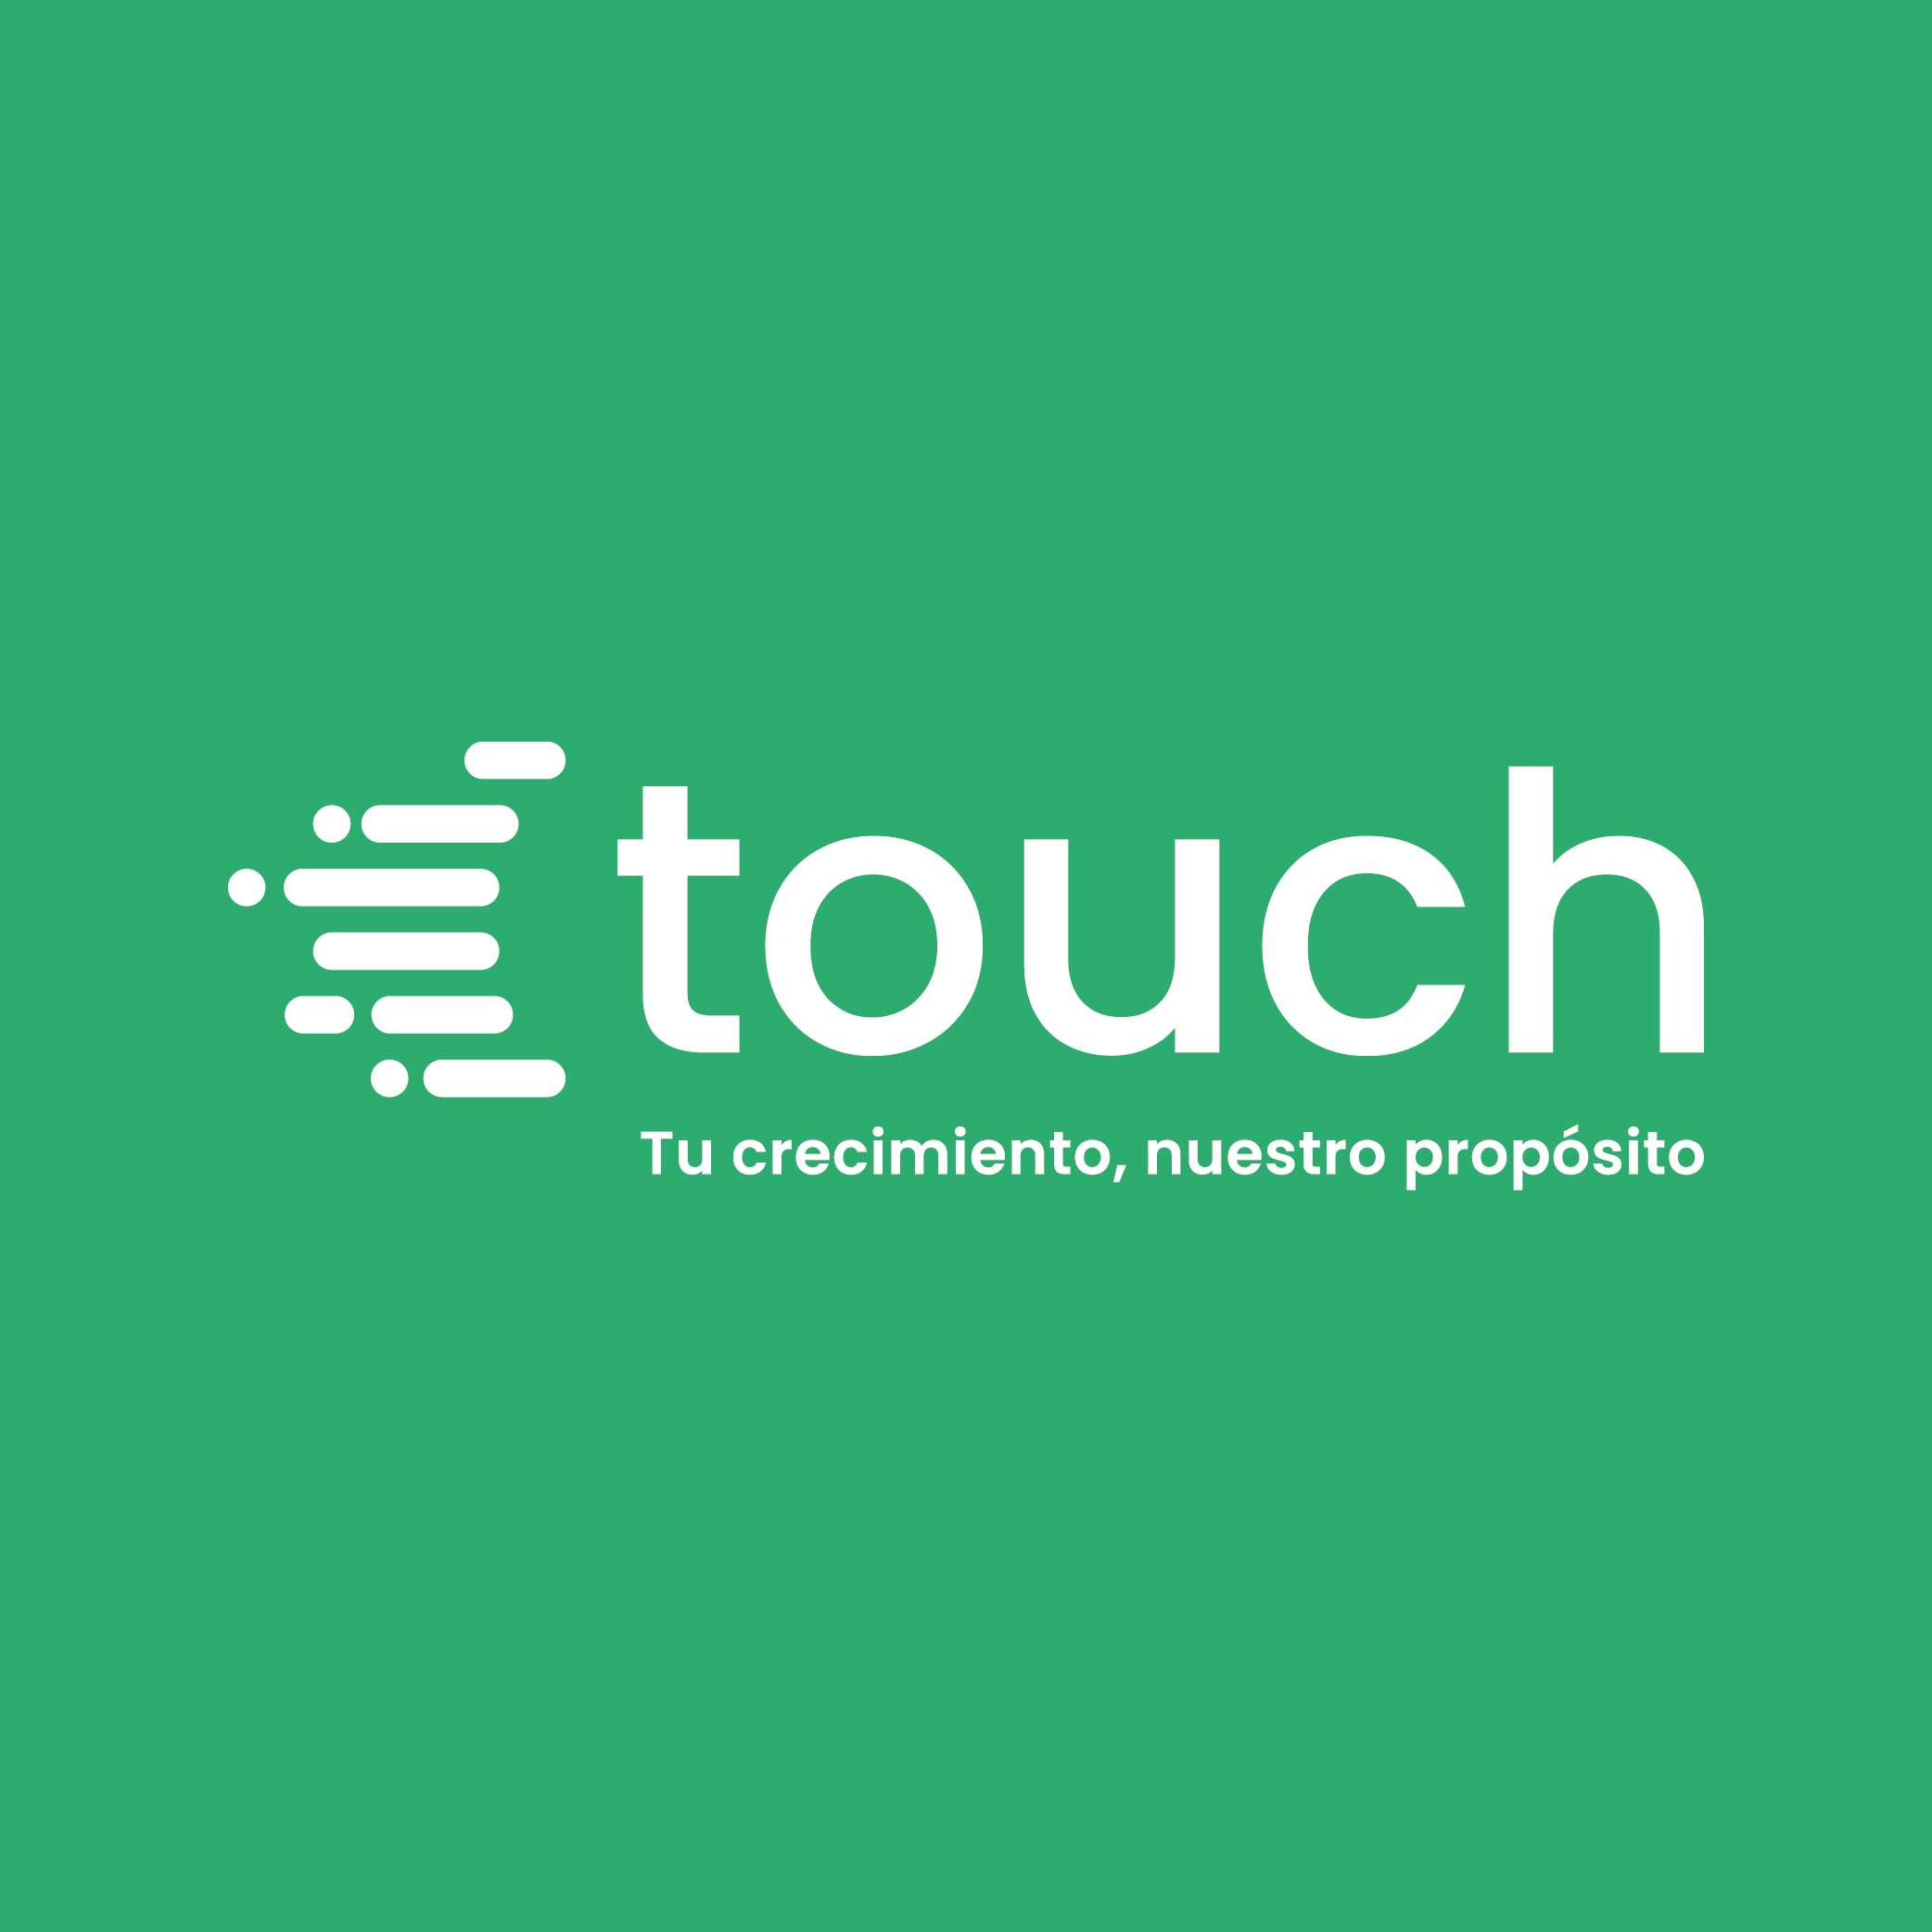 LOGO_TOUCH_2022_04_26_1143.PNG